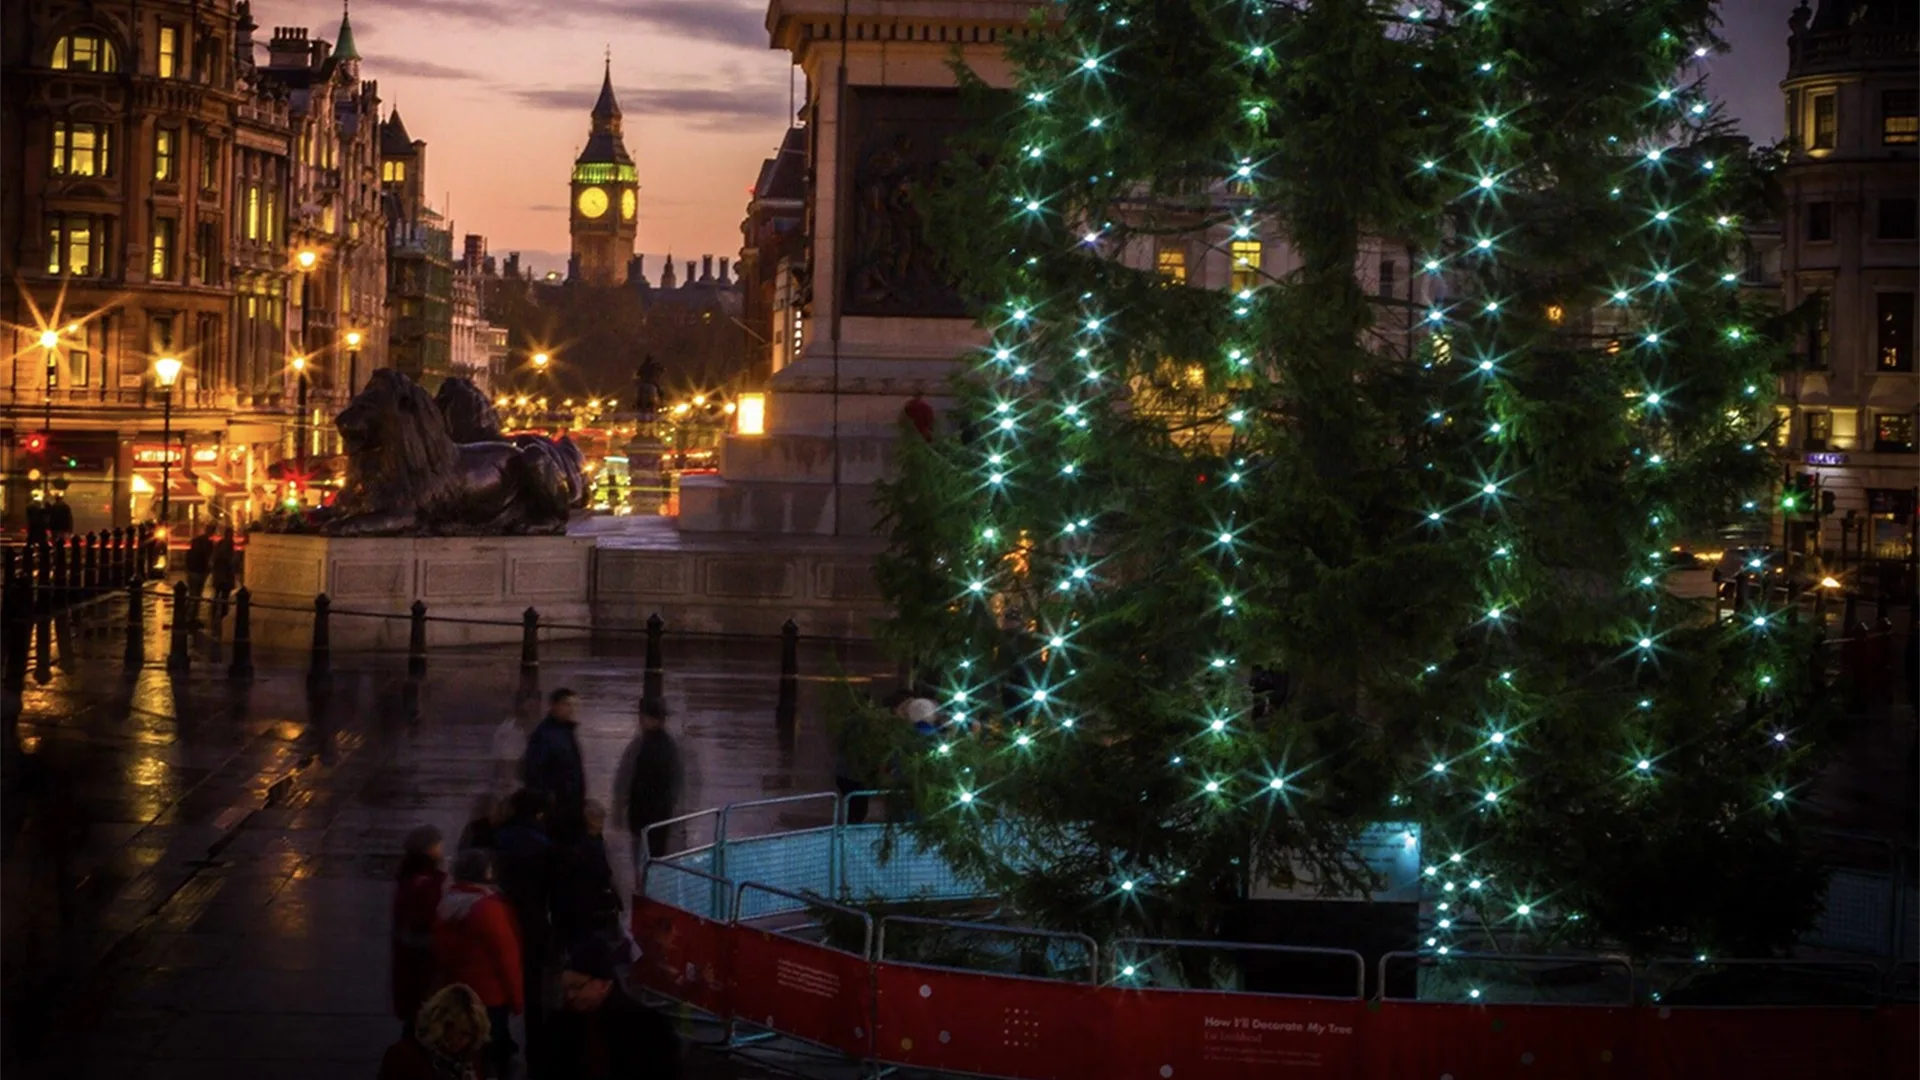 London at Christmas time with a Christmas tree in the picture